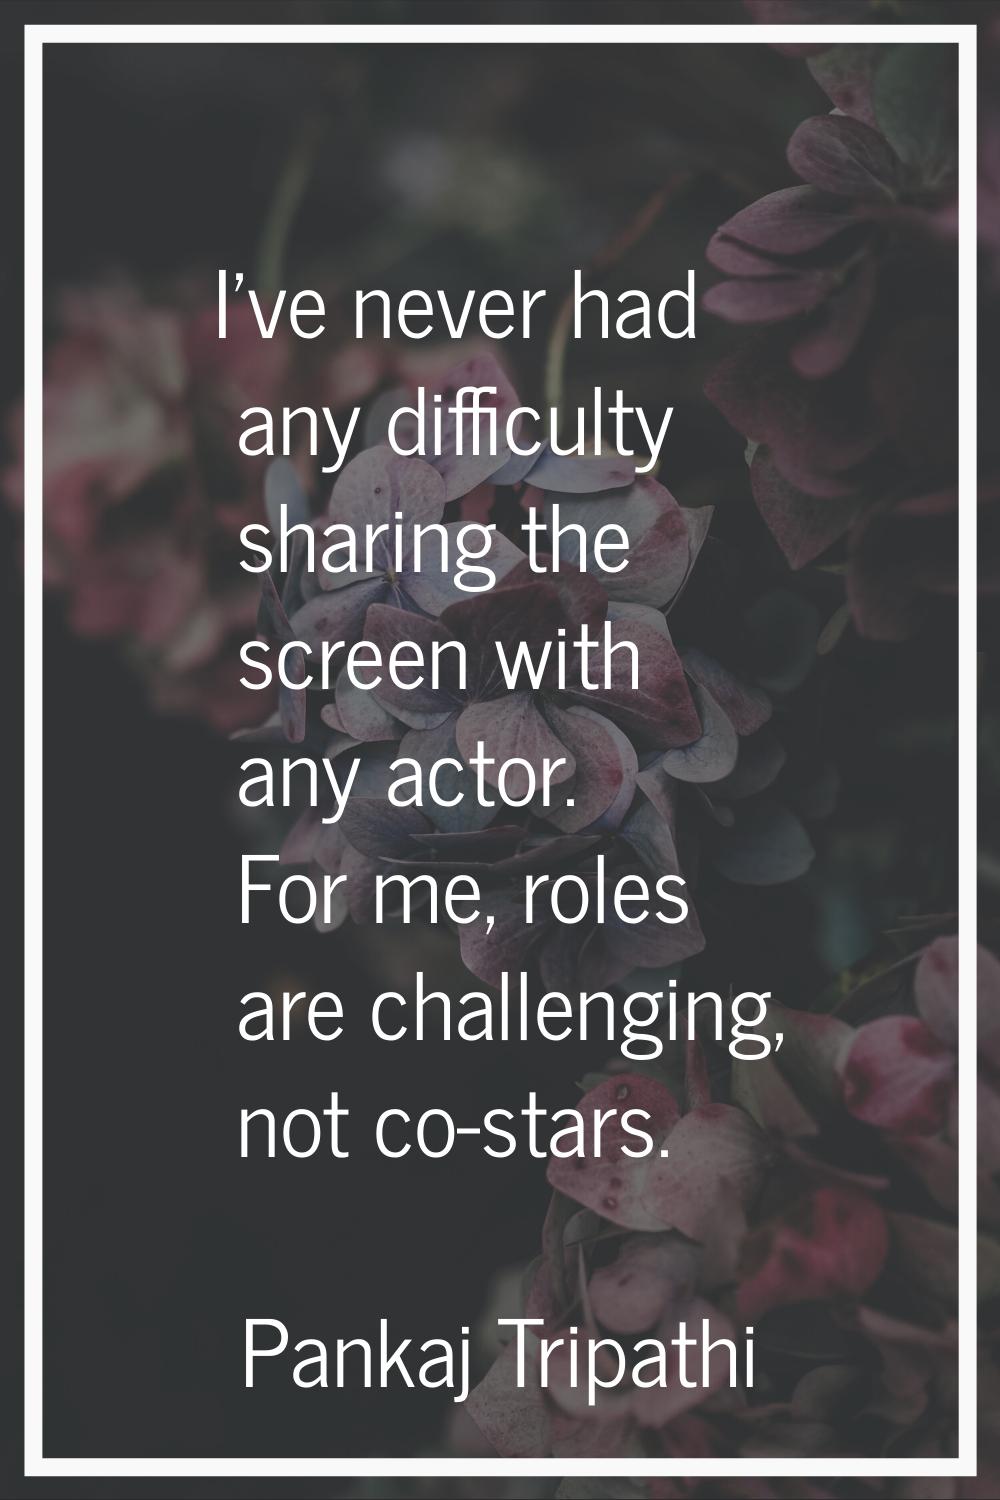 I've never had any difficulty sharing the screen with any actor. For me, roles are challenging, not